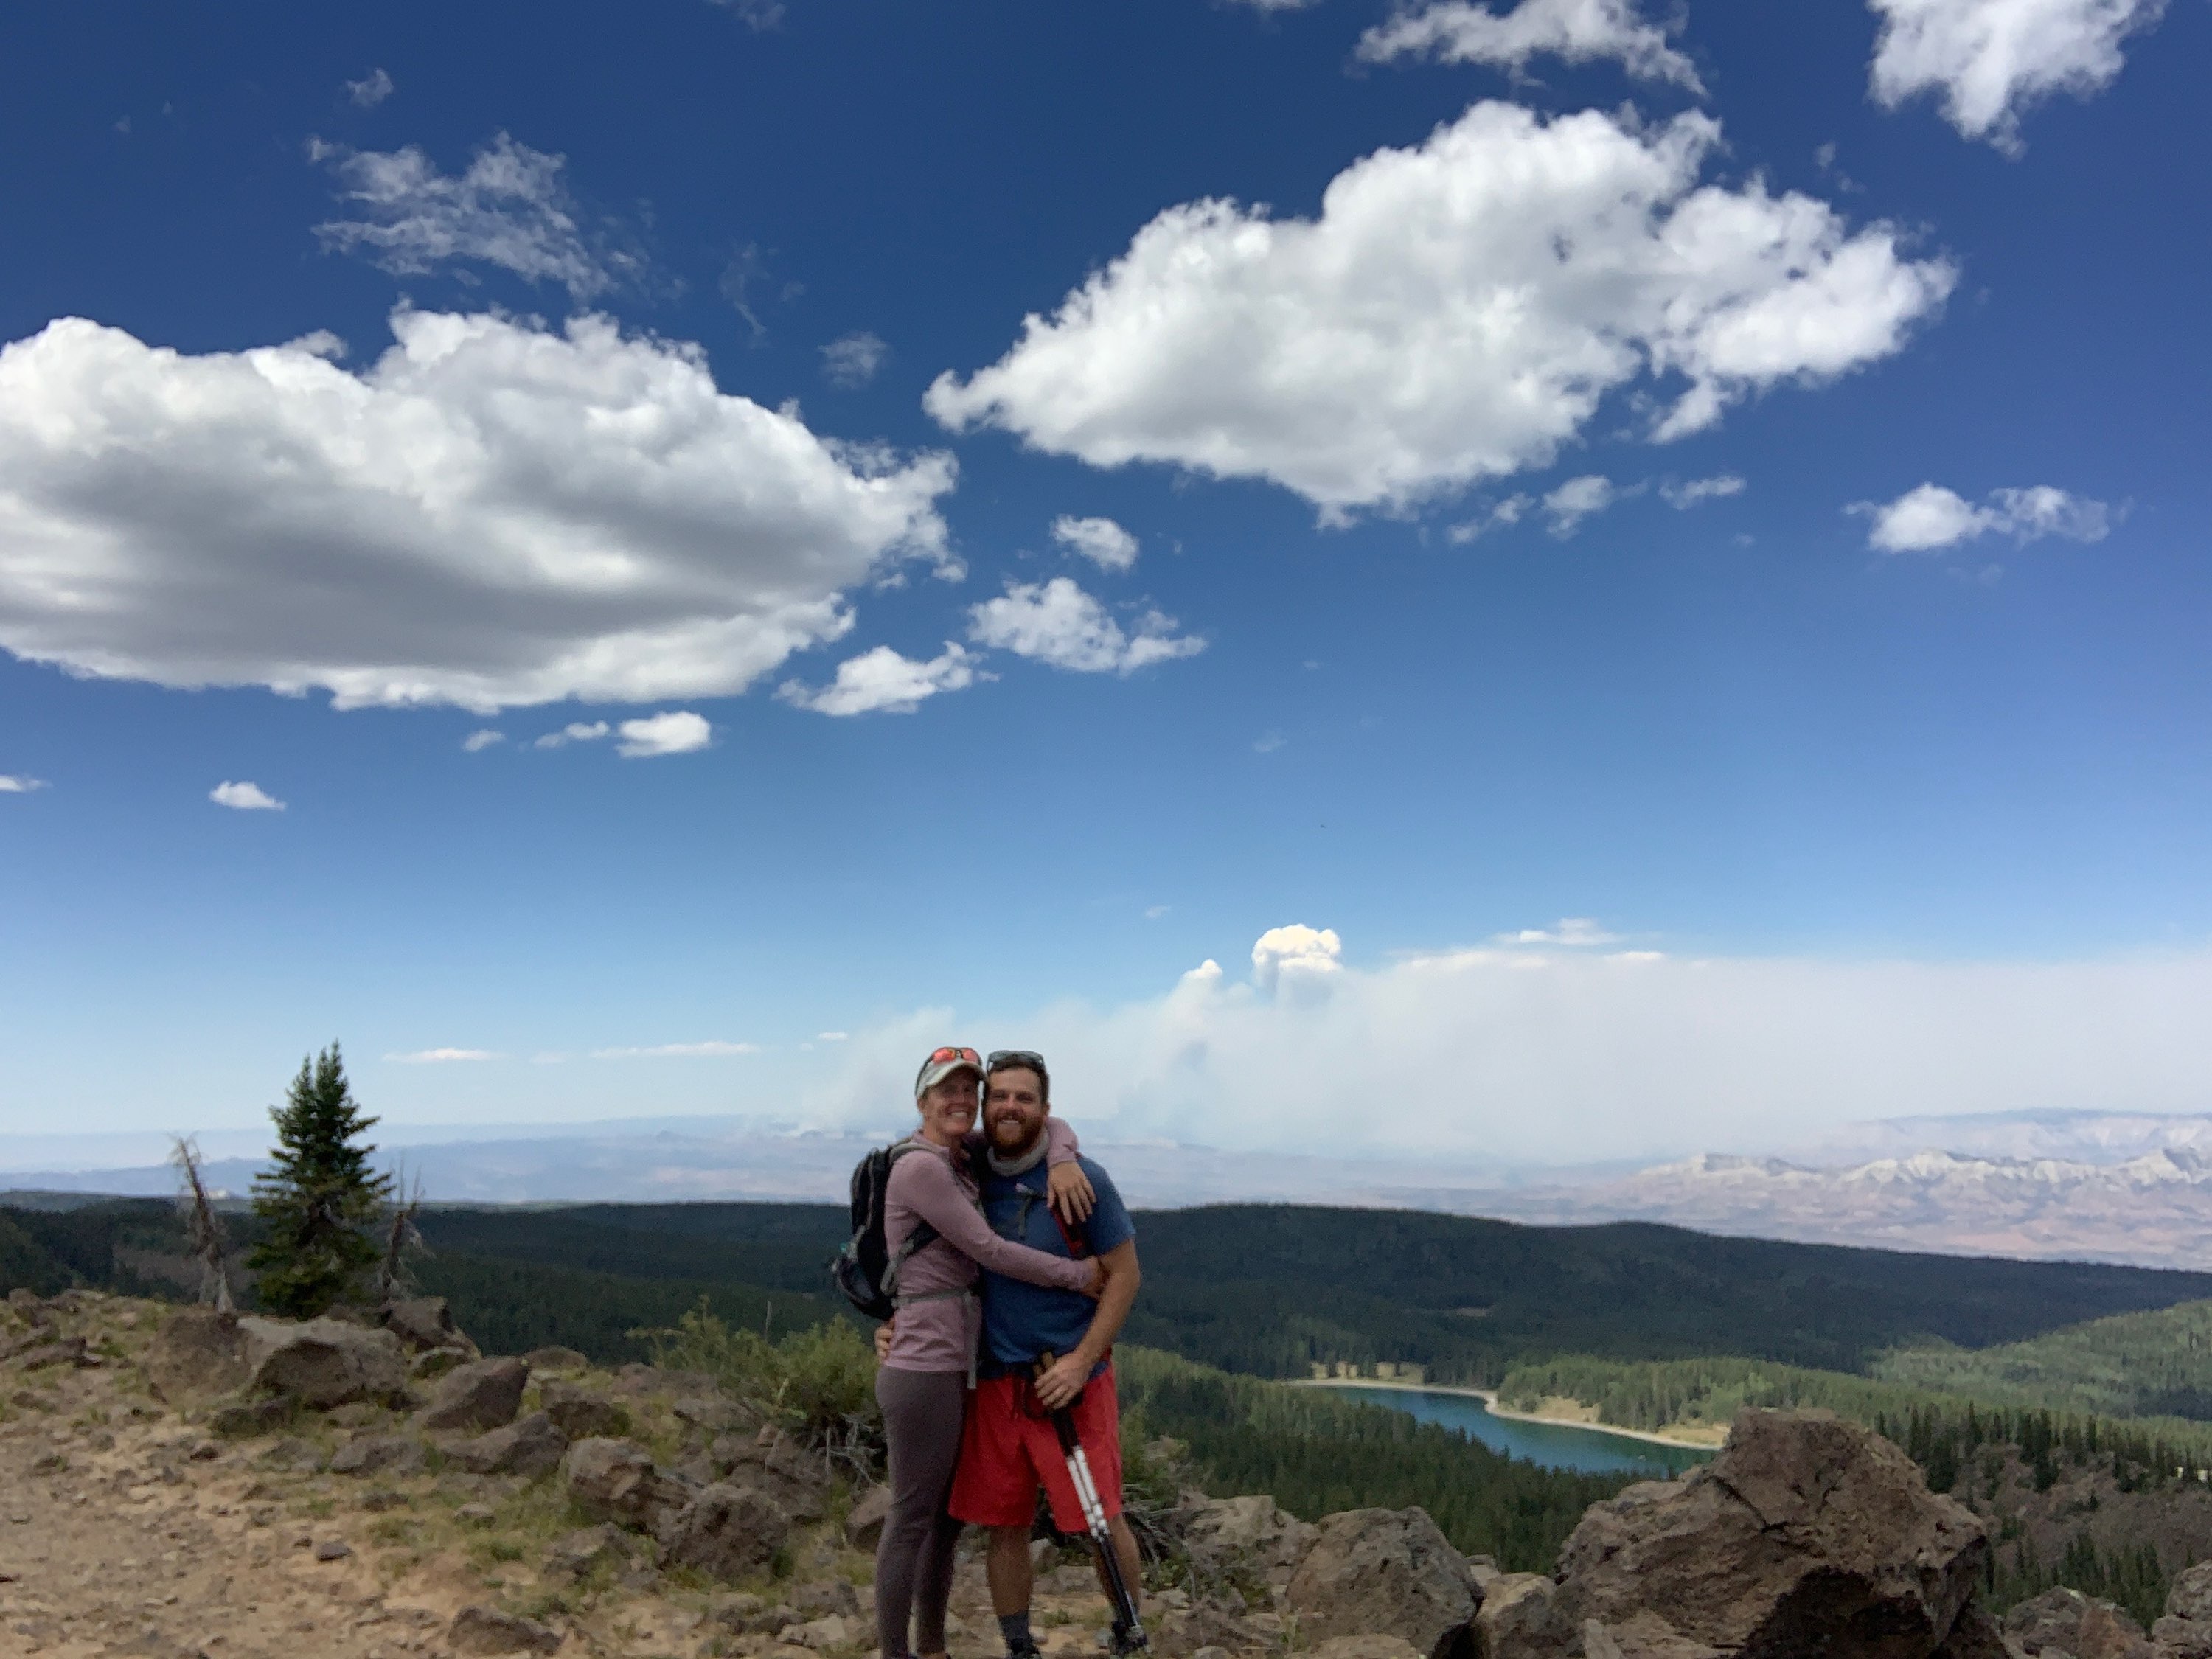 Enjoying one of my favorite hikes on the Grand Mesa. Crag Crest Trail has amazing views and is a great trail to check out on the Mesa.